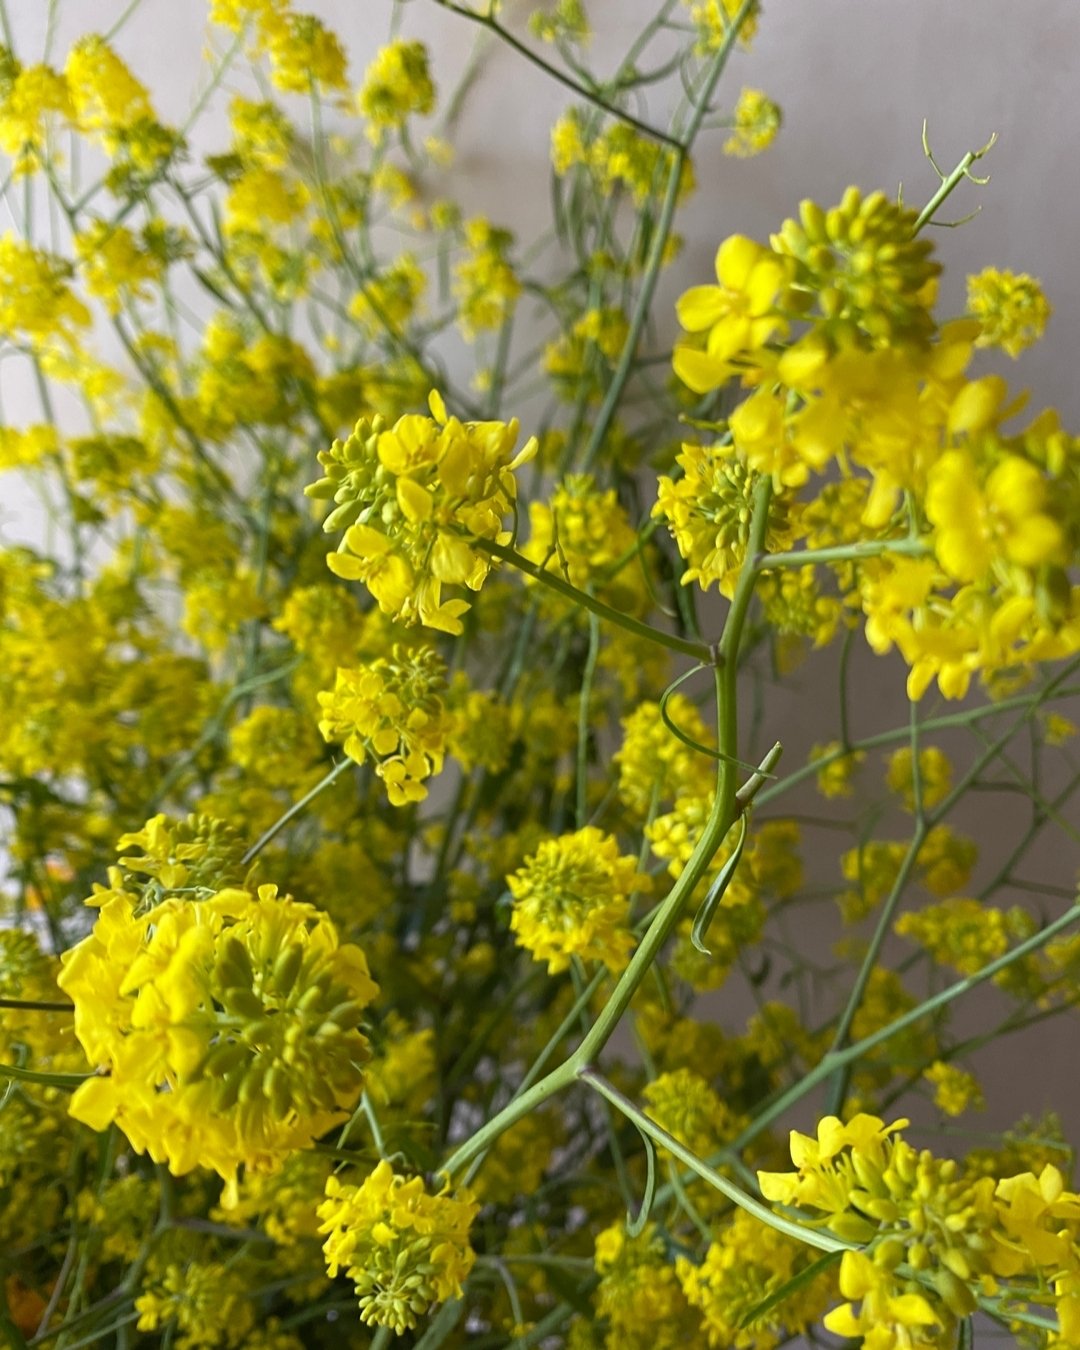 Our shop is open! FYI Next week we will be offering a THURSDAY delivery on 5/9 instead of Wednesday for Mother&rsquo;s Day. Delivering on Monday 5/6 as usual.

BRASSICA juncea 'Mustard' - Alcott Botanicals
VIBURNUM opulus var. americanum 'Snowball Bu